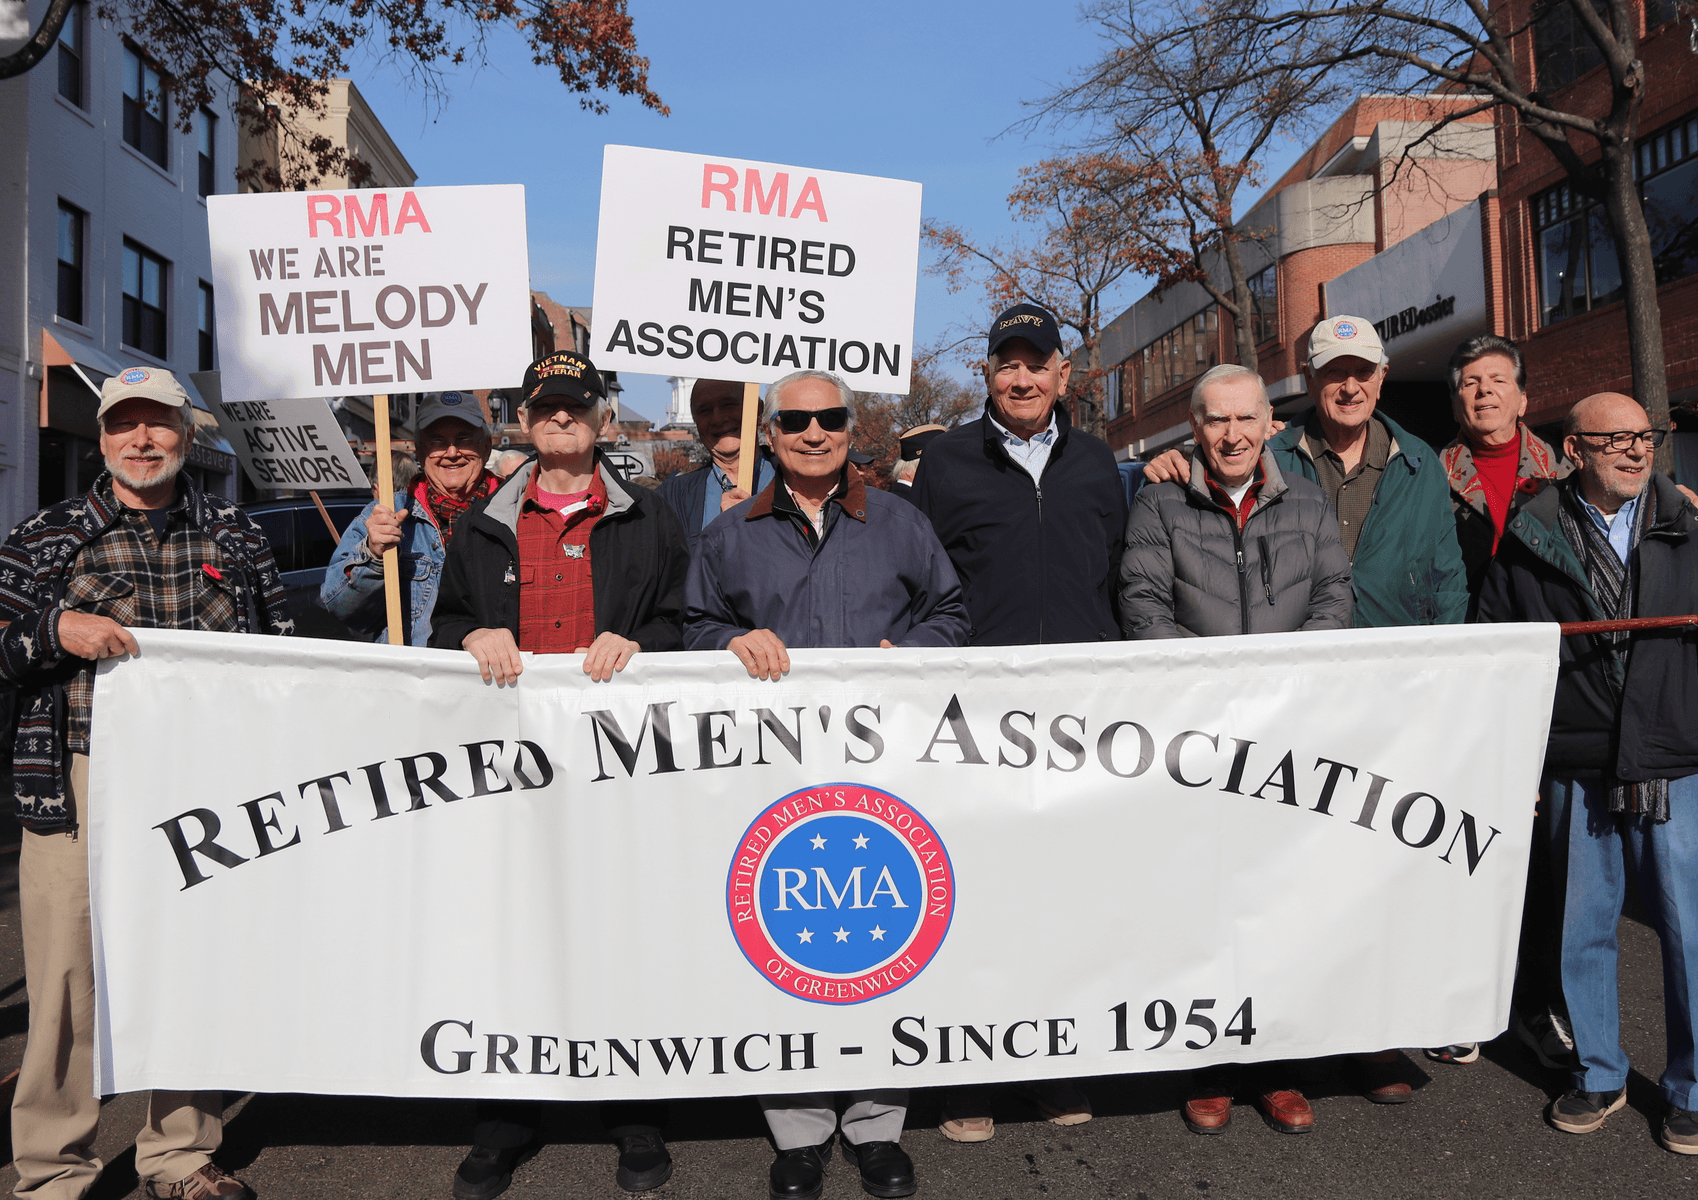 The Retired Men's Association participated in the Patriotic Walk on Nov 11, 2019. Photo: Leslie yager